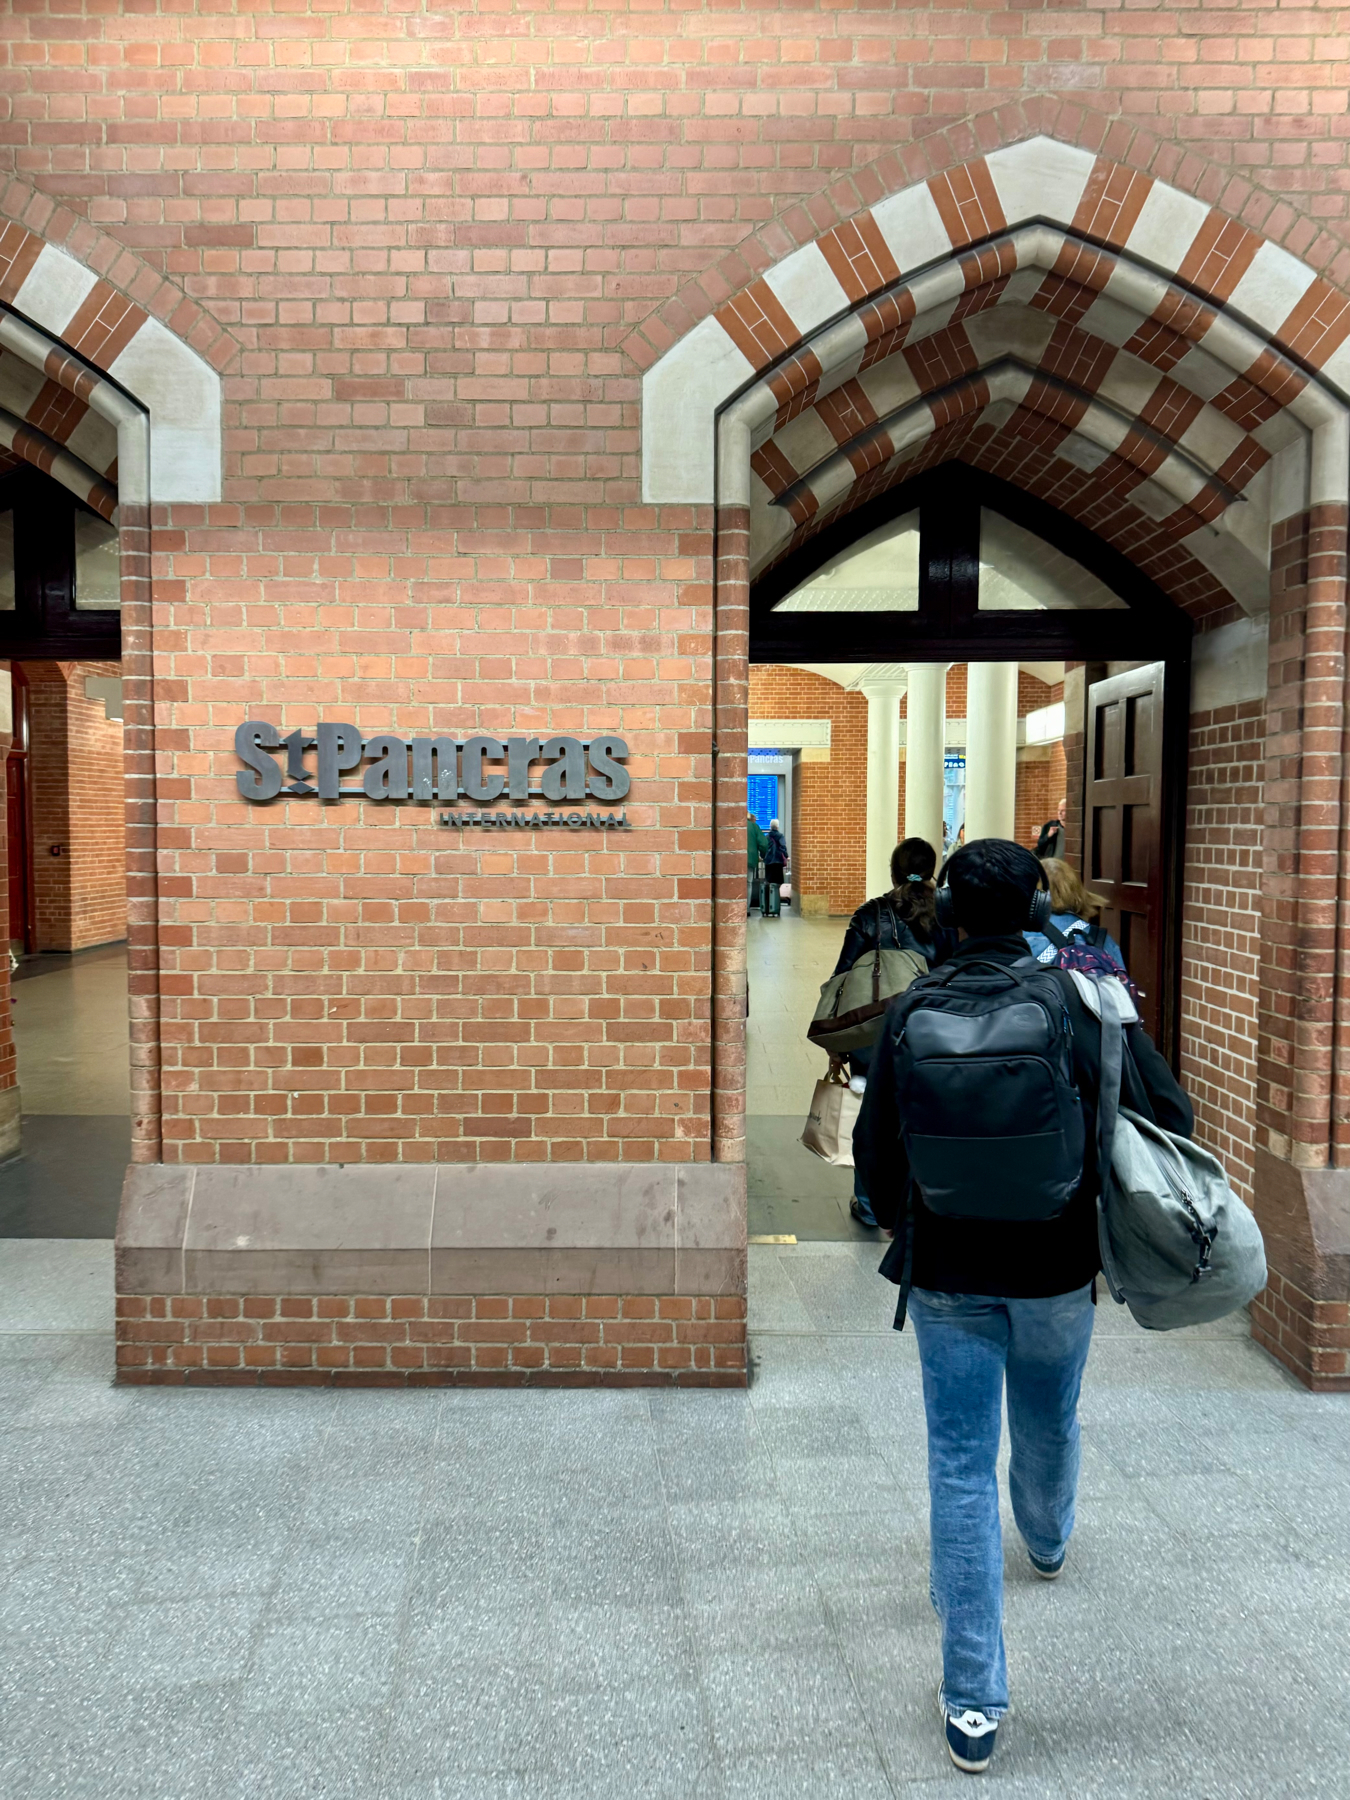 A person walking through an arched corridor with the sign “St Pancras International” on a brick wall, indicating a location within St Pancras railway station.